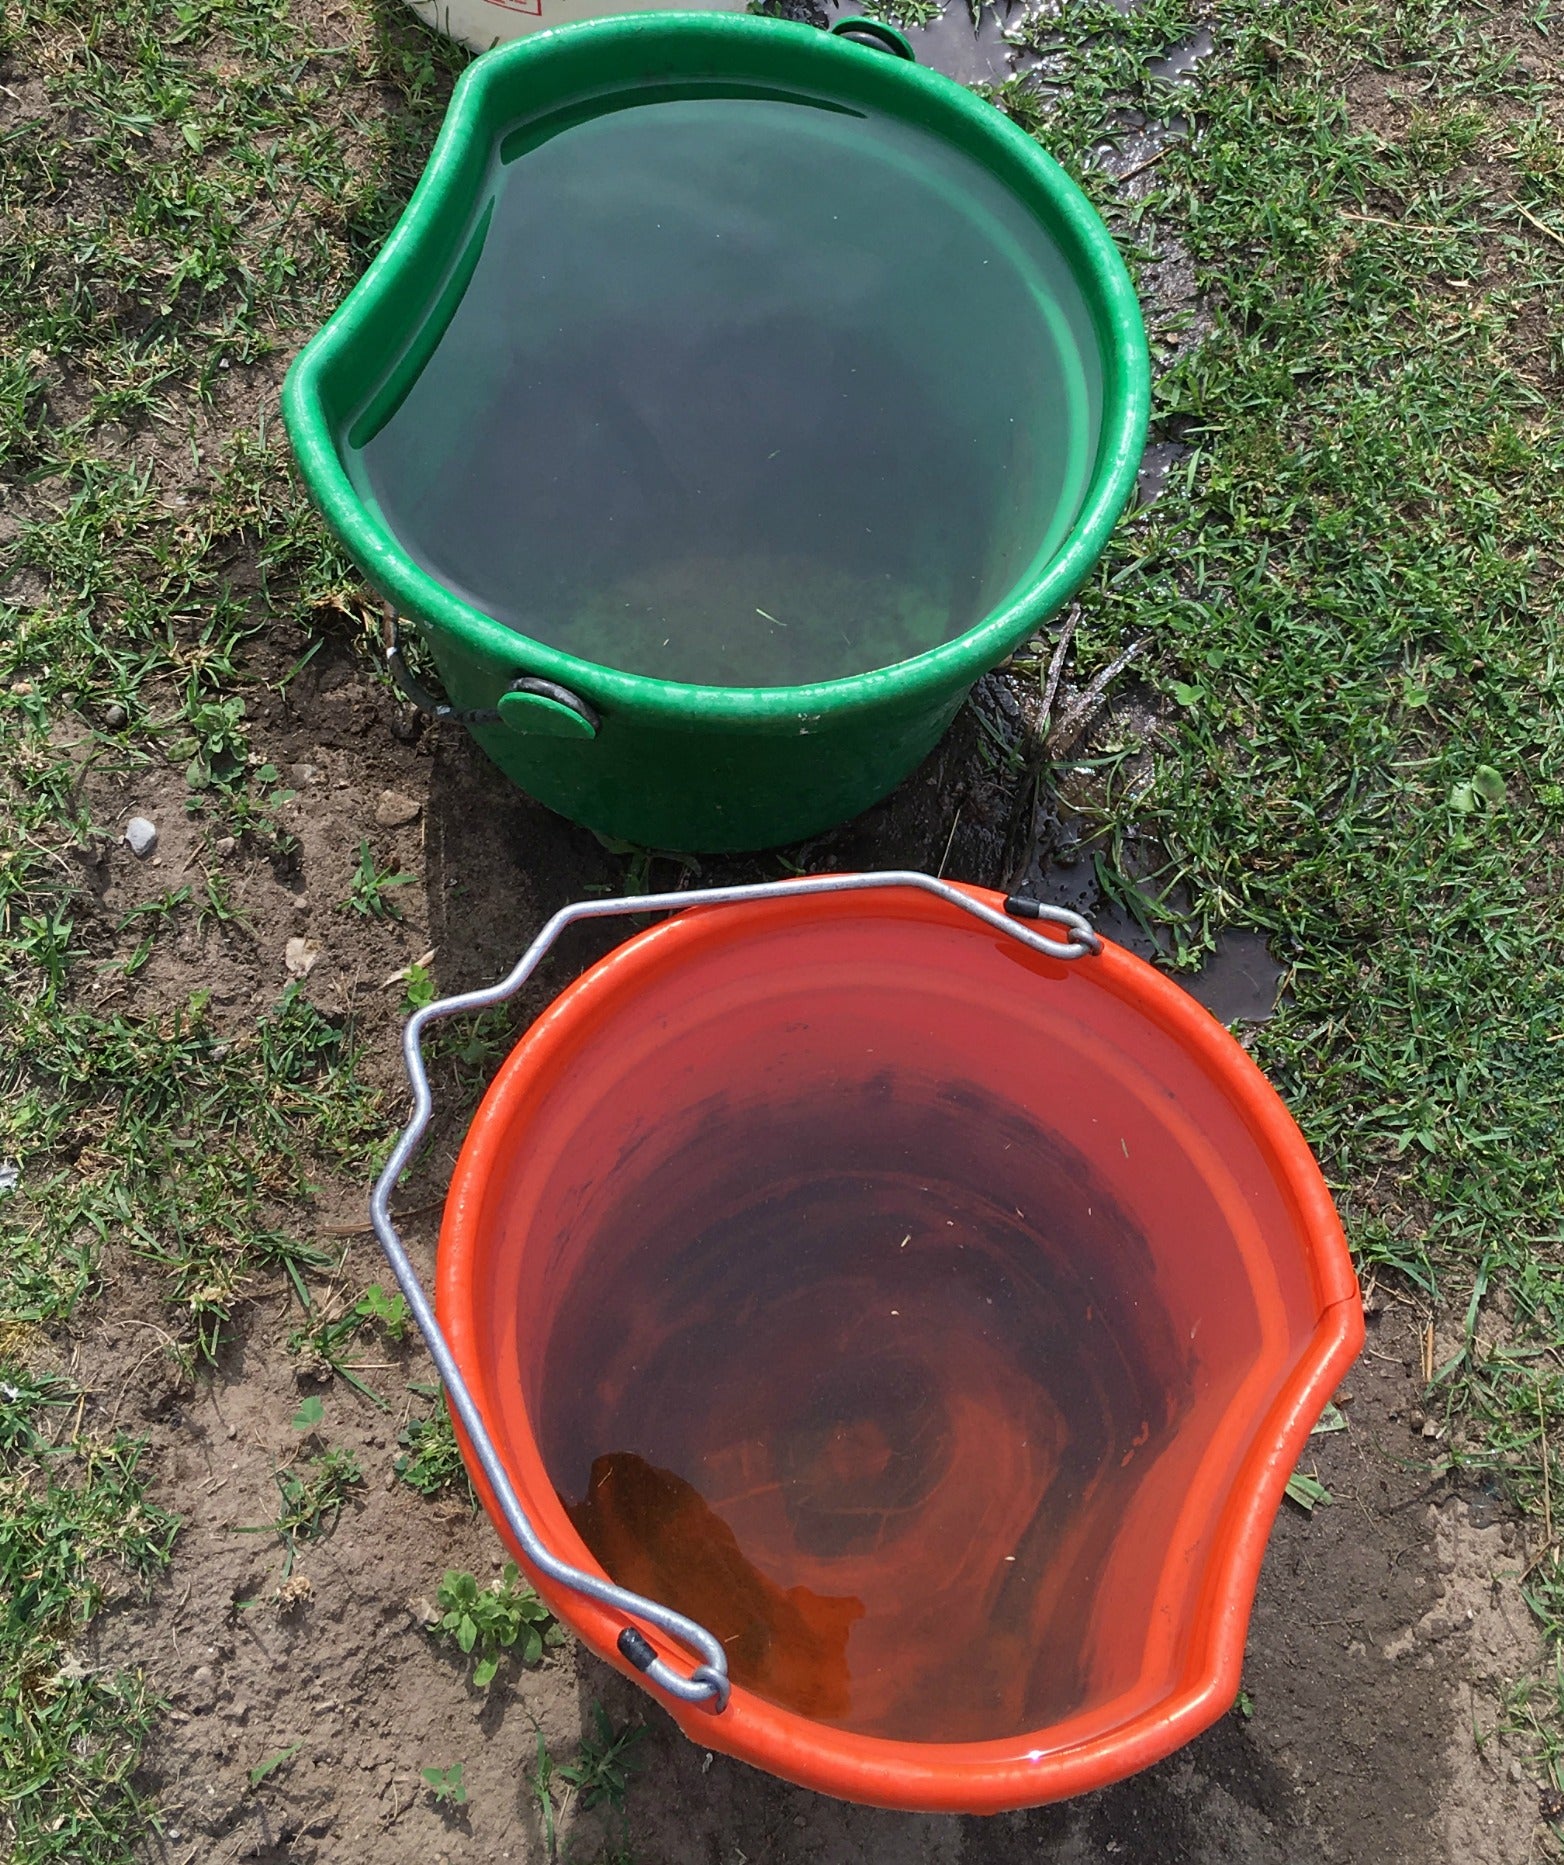 Tips to Keep Your Horse Buckets Clean This Summer